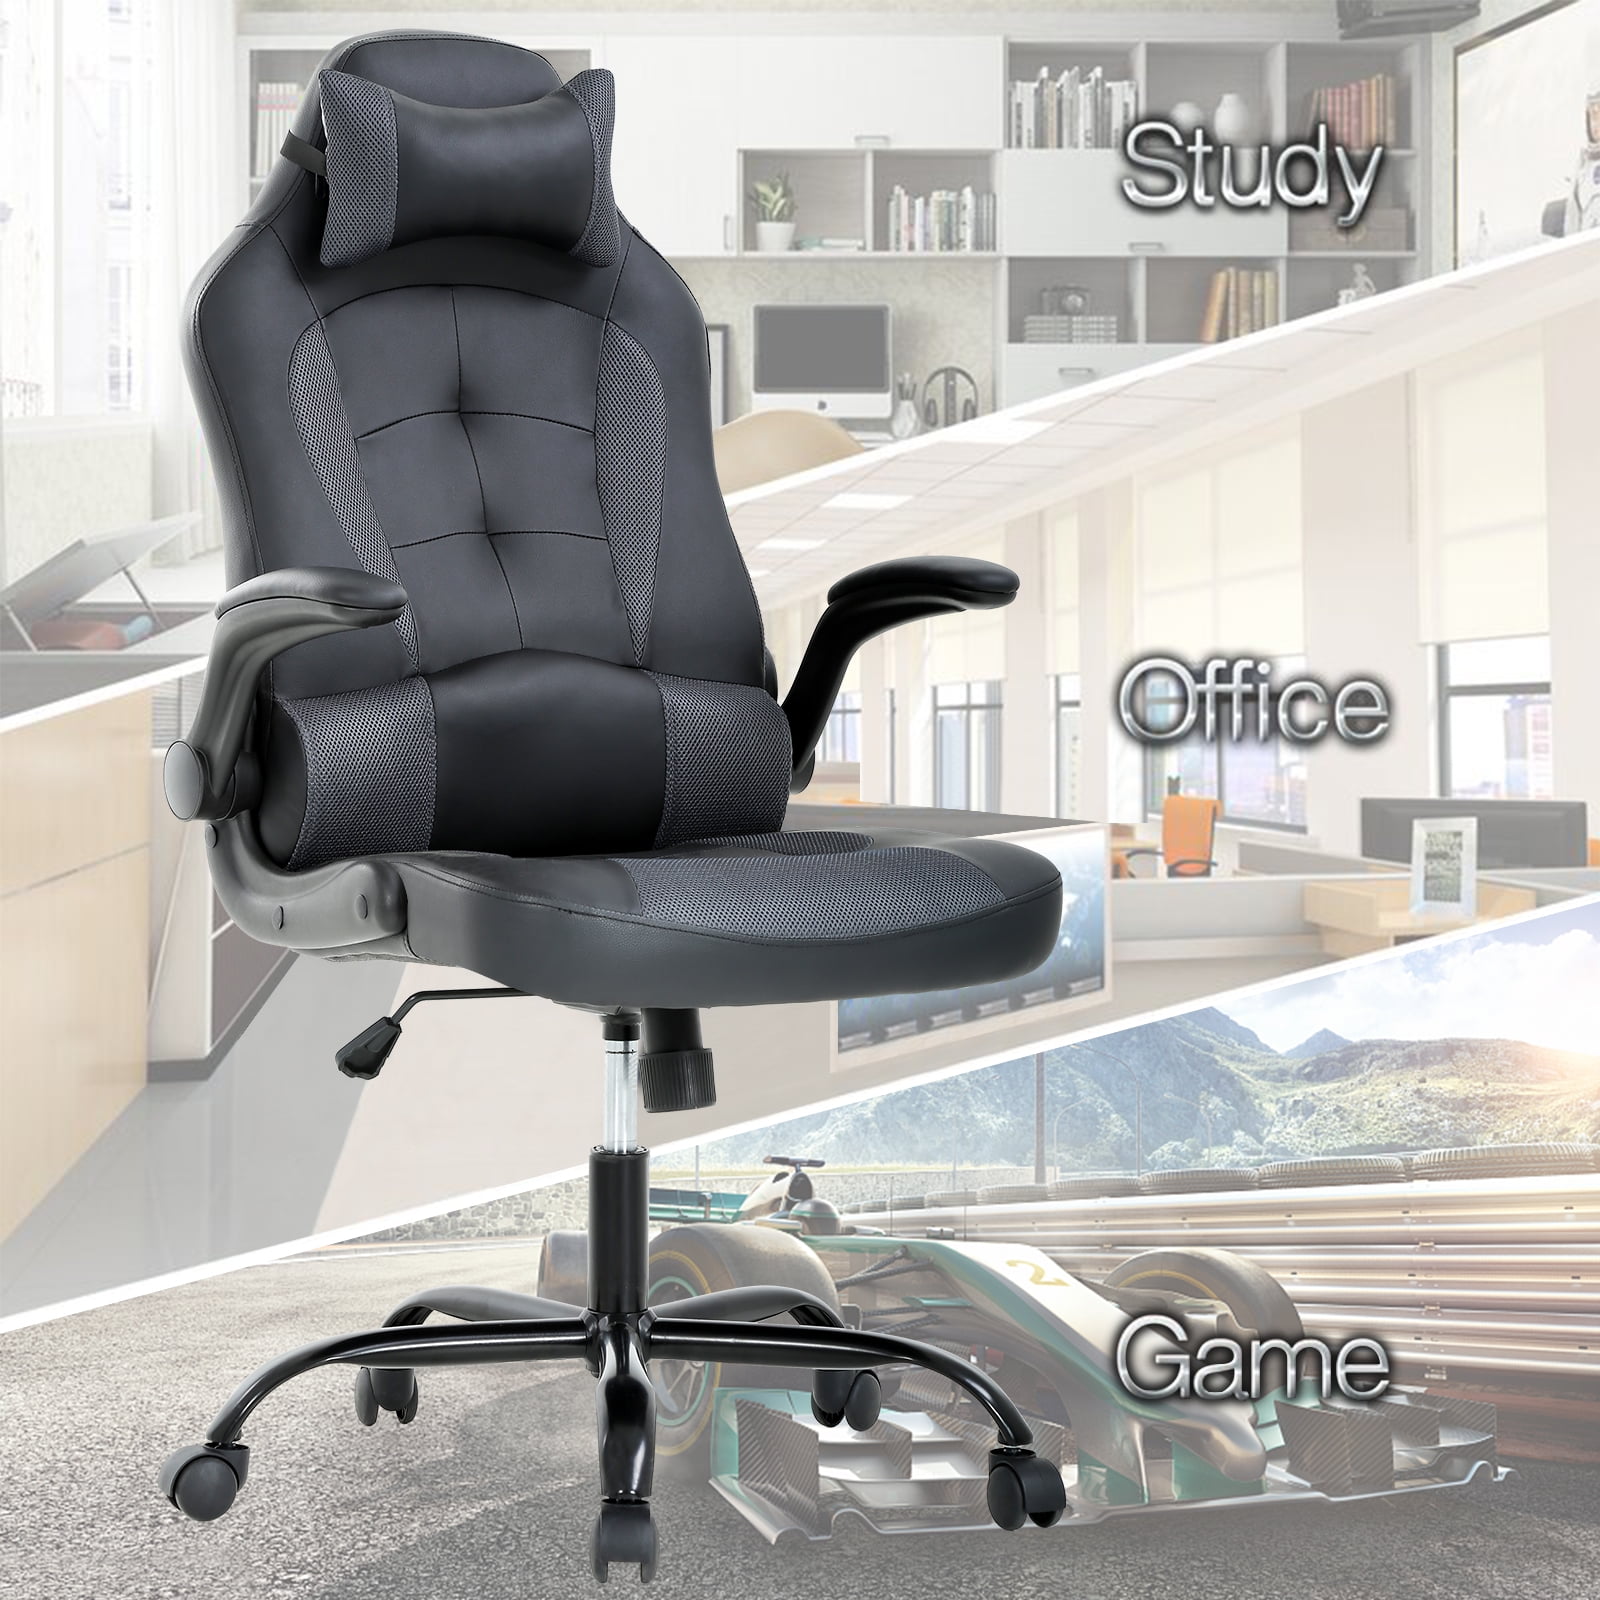 Lorell High Back Gaming Chair with Foldable Footrest – Ergo Standing Desks